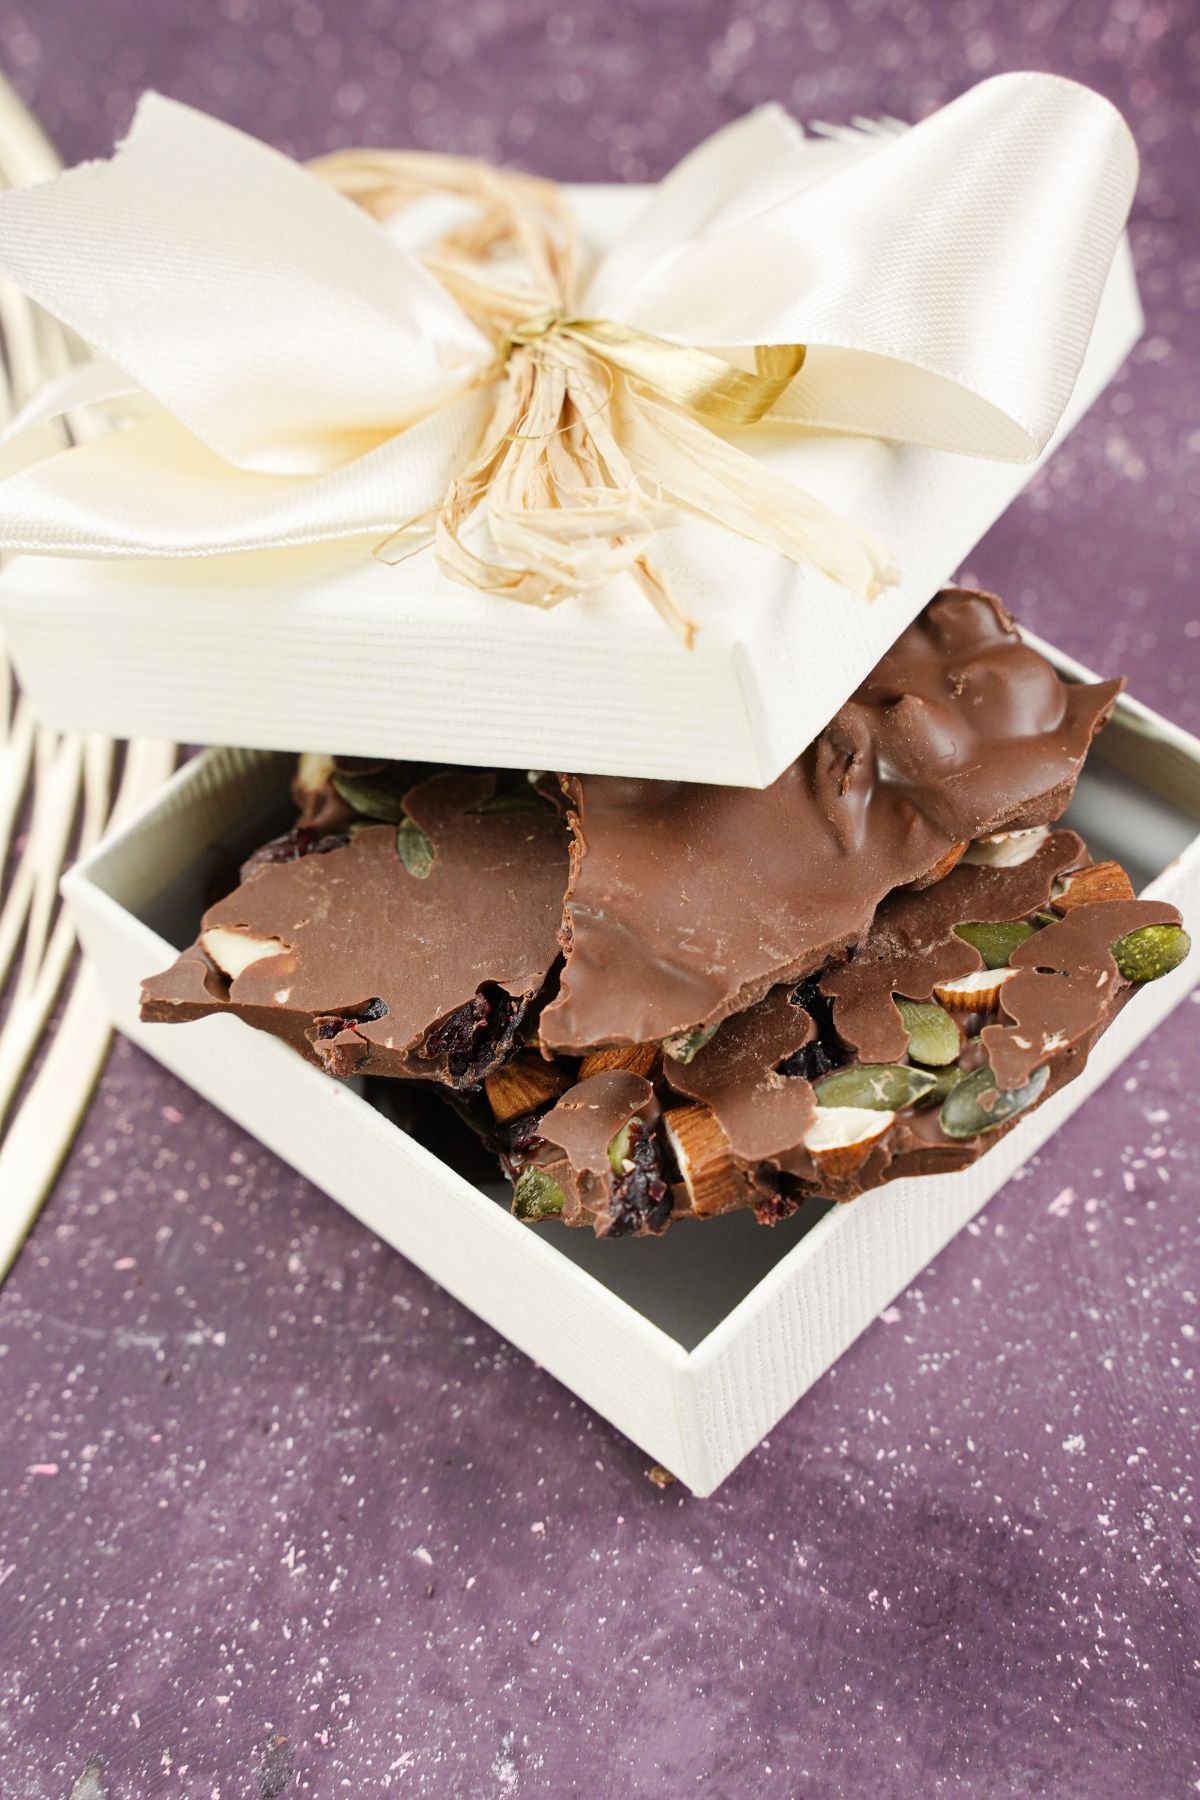 Nut and Seed Chocolate Bark served in a gifting box